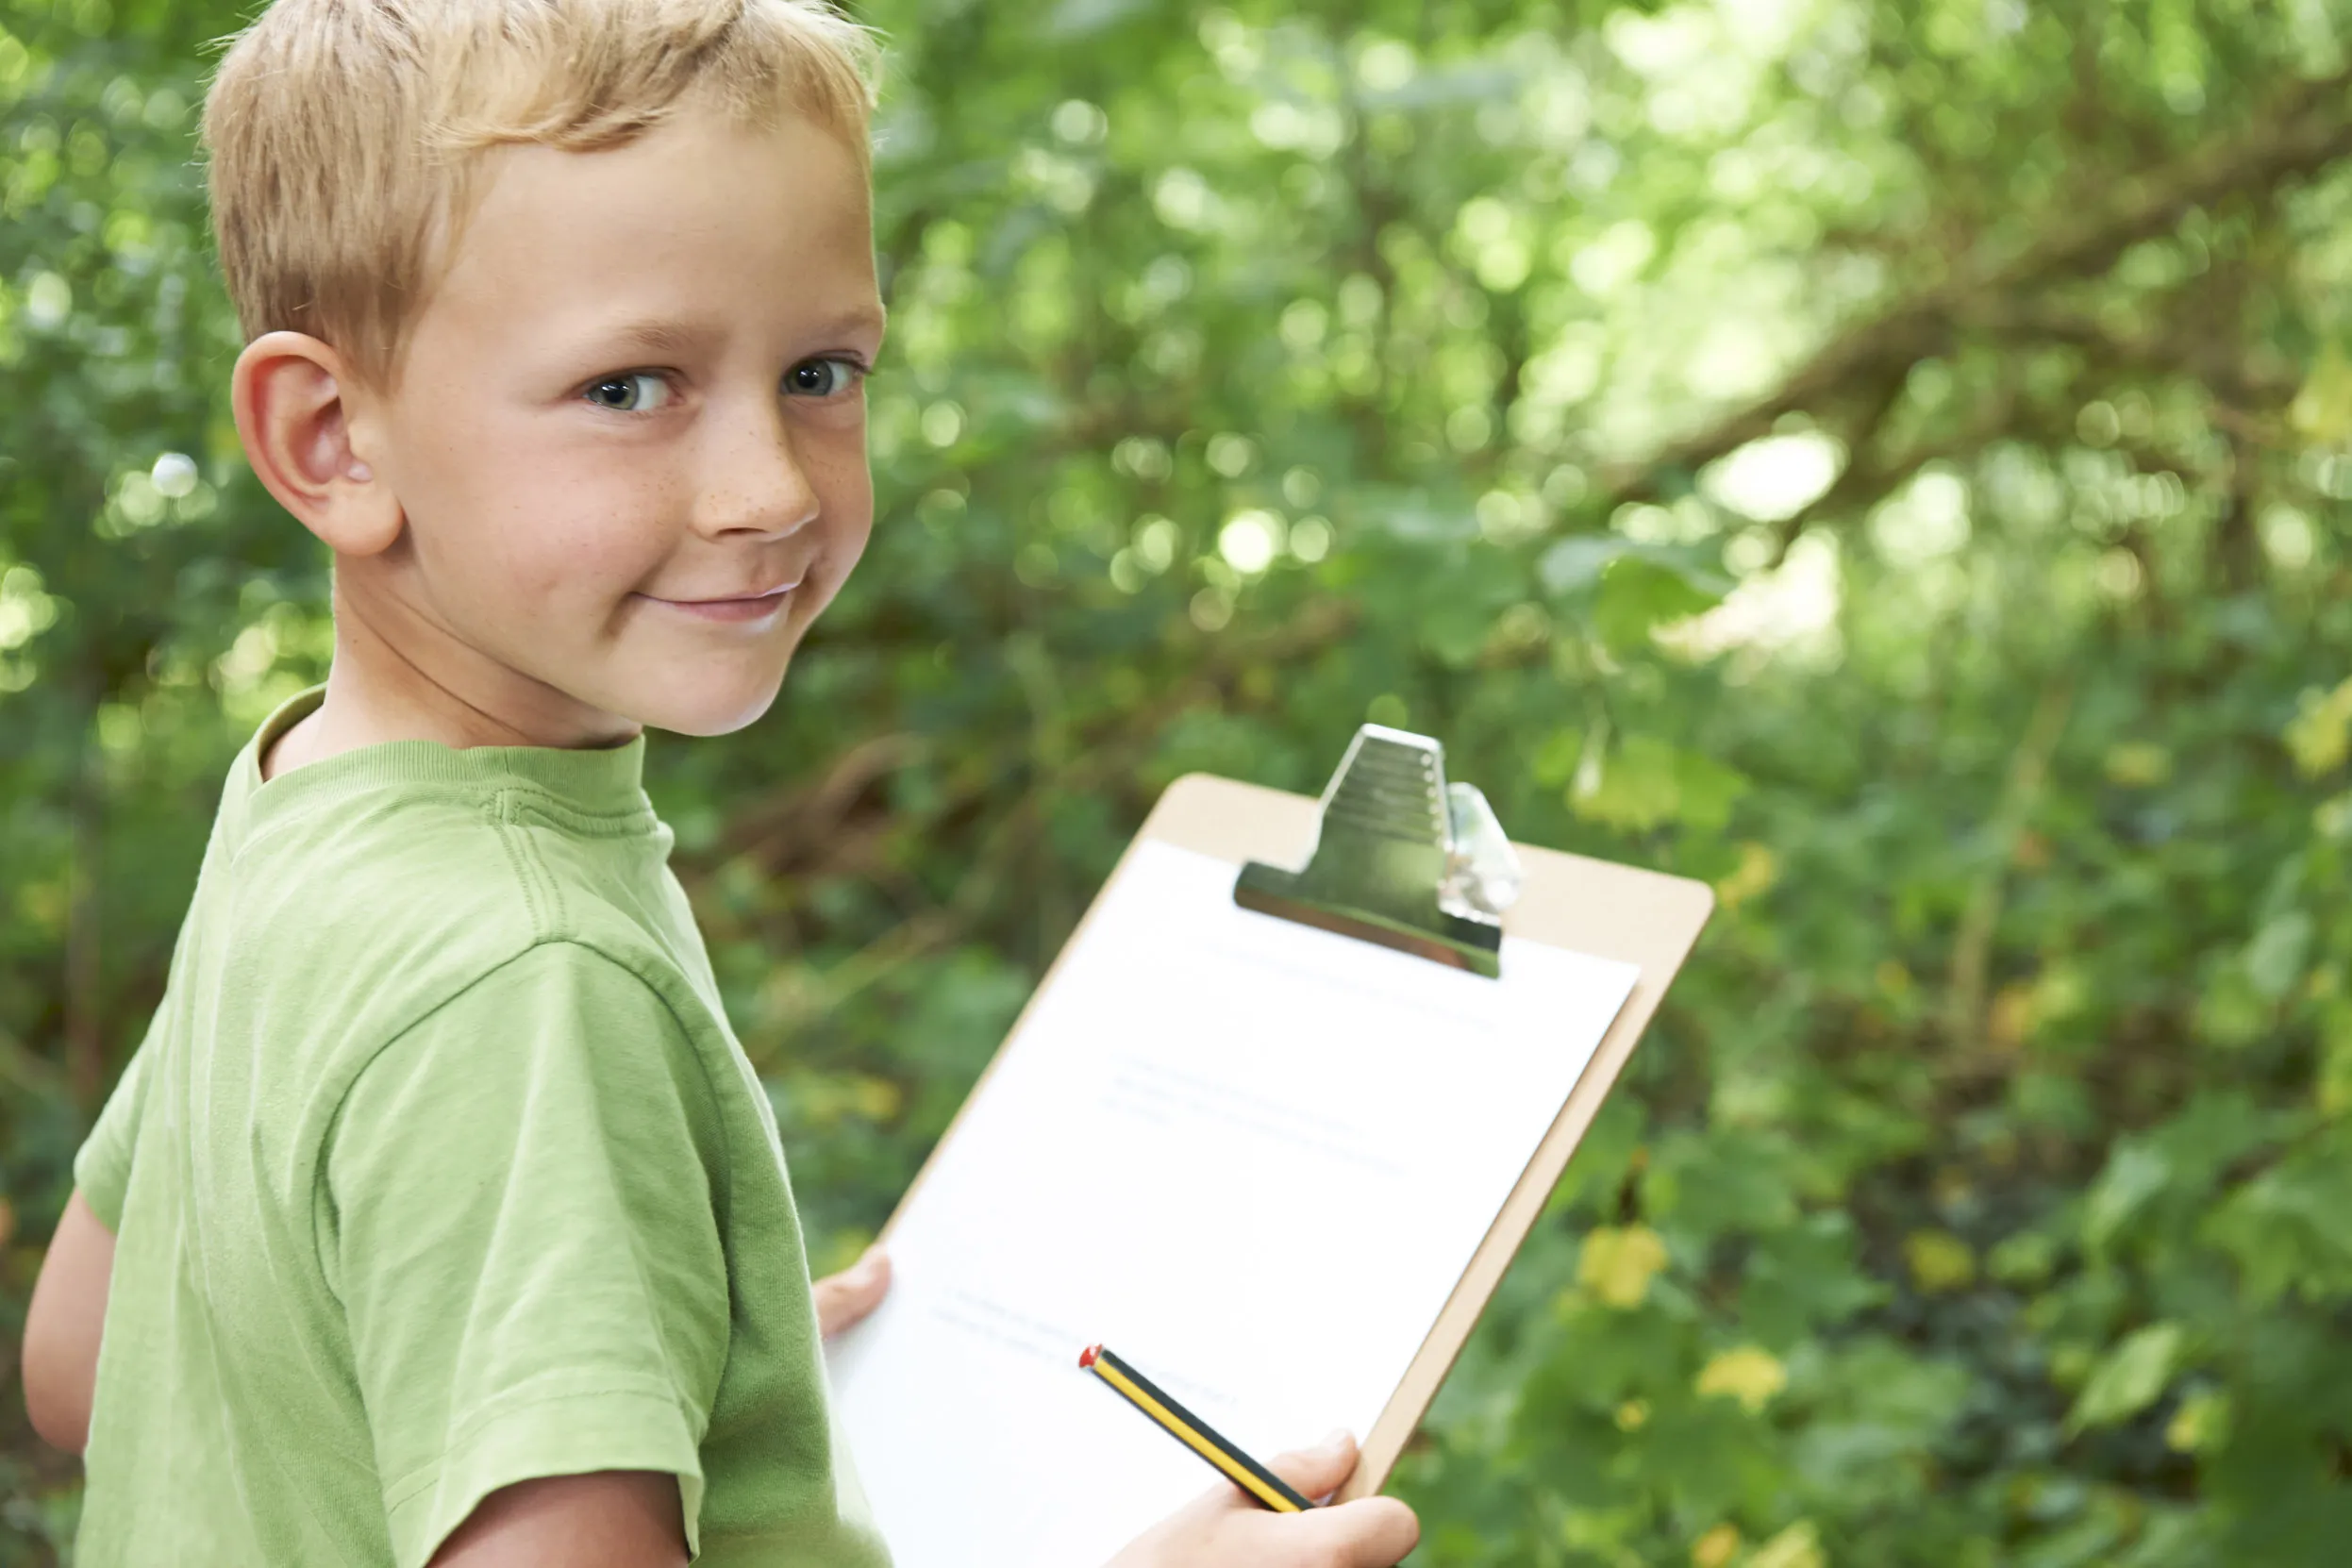 A child wearing a green top writing notes on a clipboard in the woods.